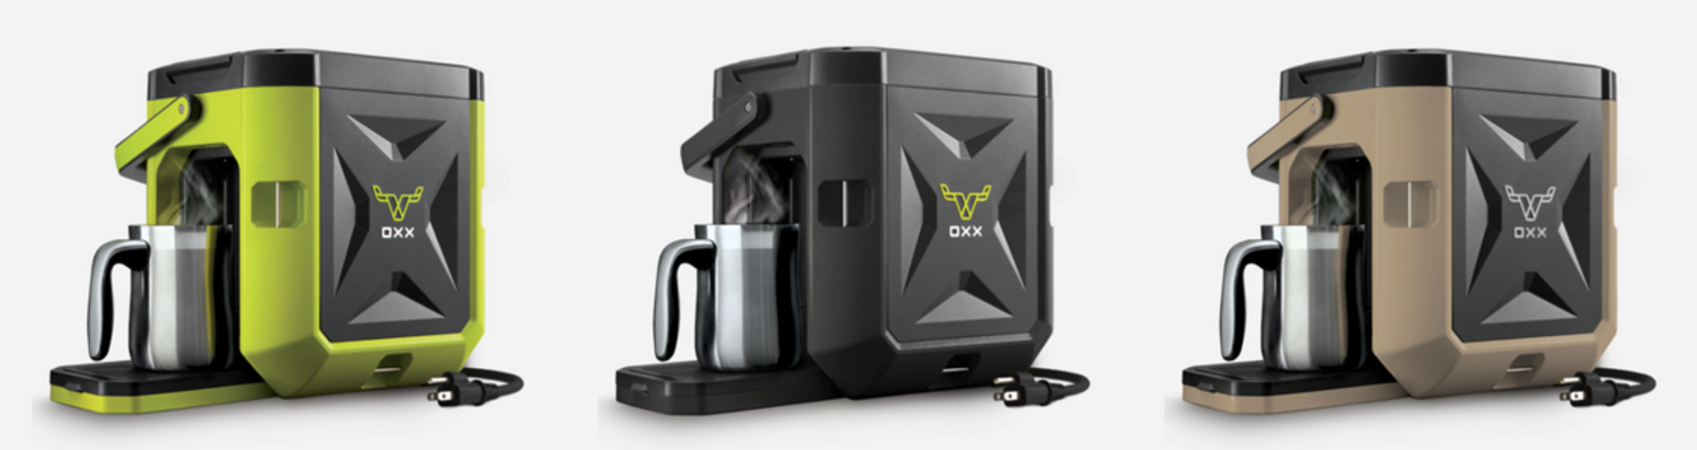 Oxx Coffeebox: The Best Camping Coffee Maker